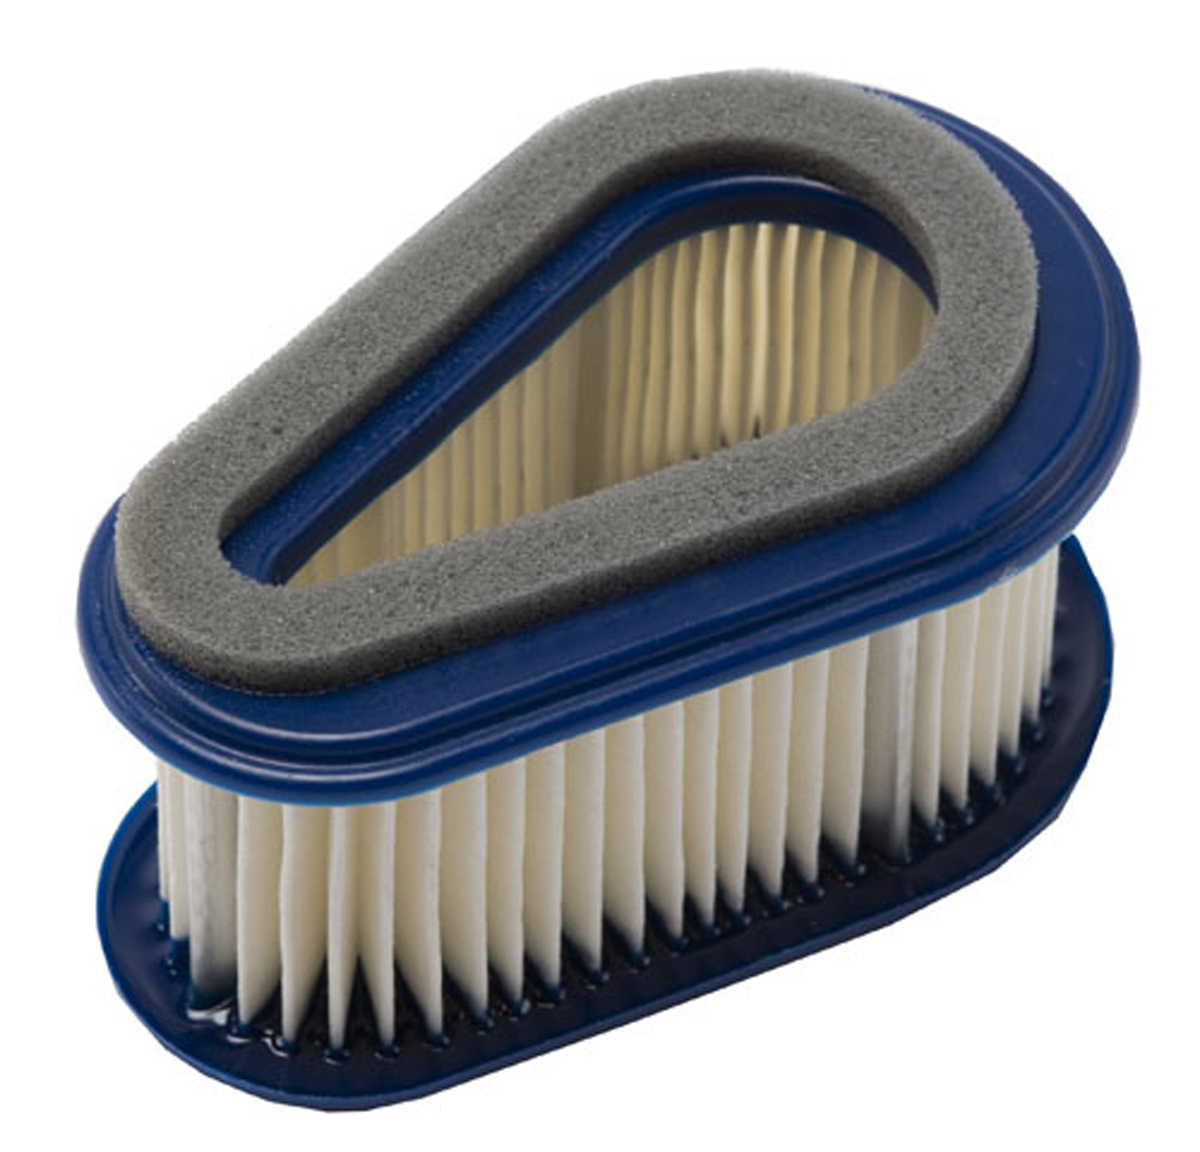 Primary Air Filter For JX Series